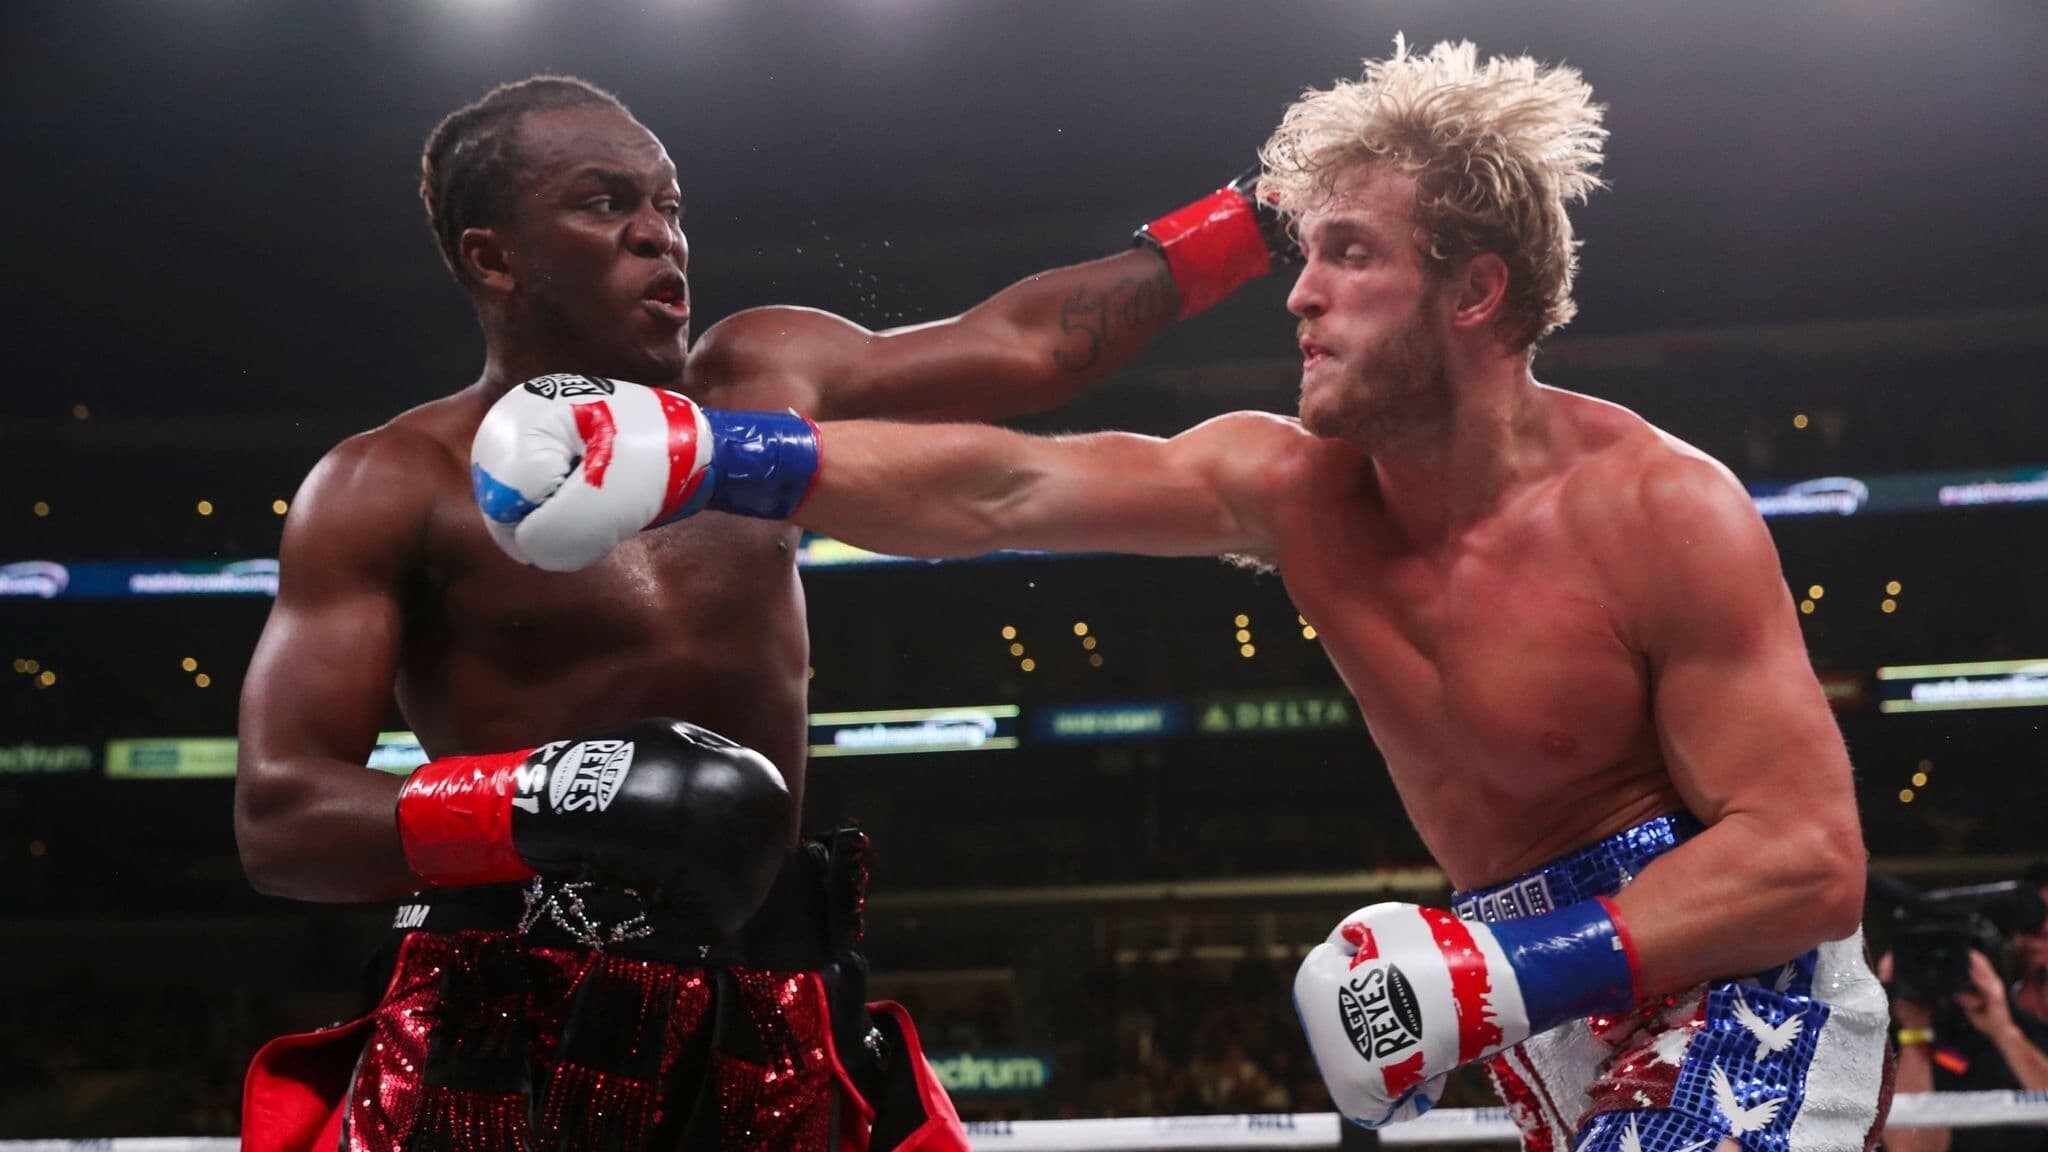 KSI vs Logan Paul 2, Movie wallpapers, Complete movies information, Boxing rematch reference, 2050x1160 HD Desktop